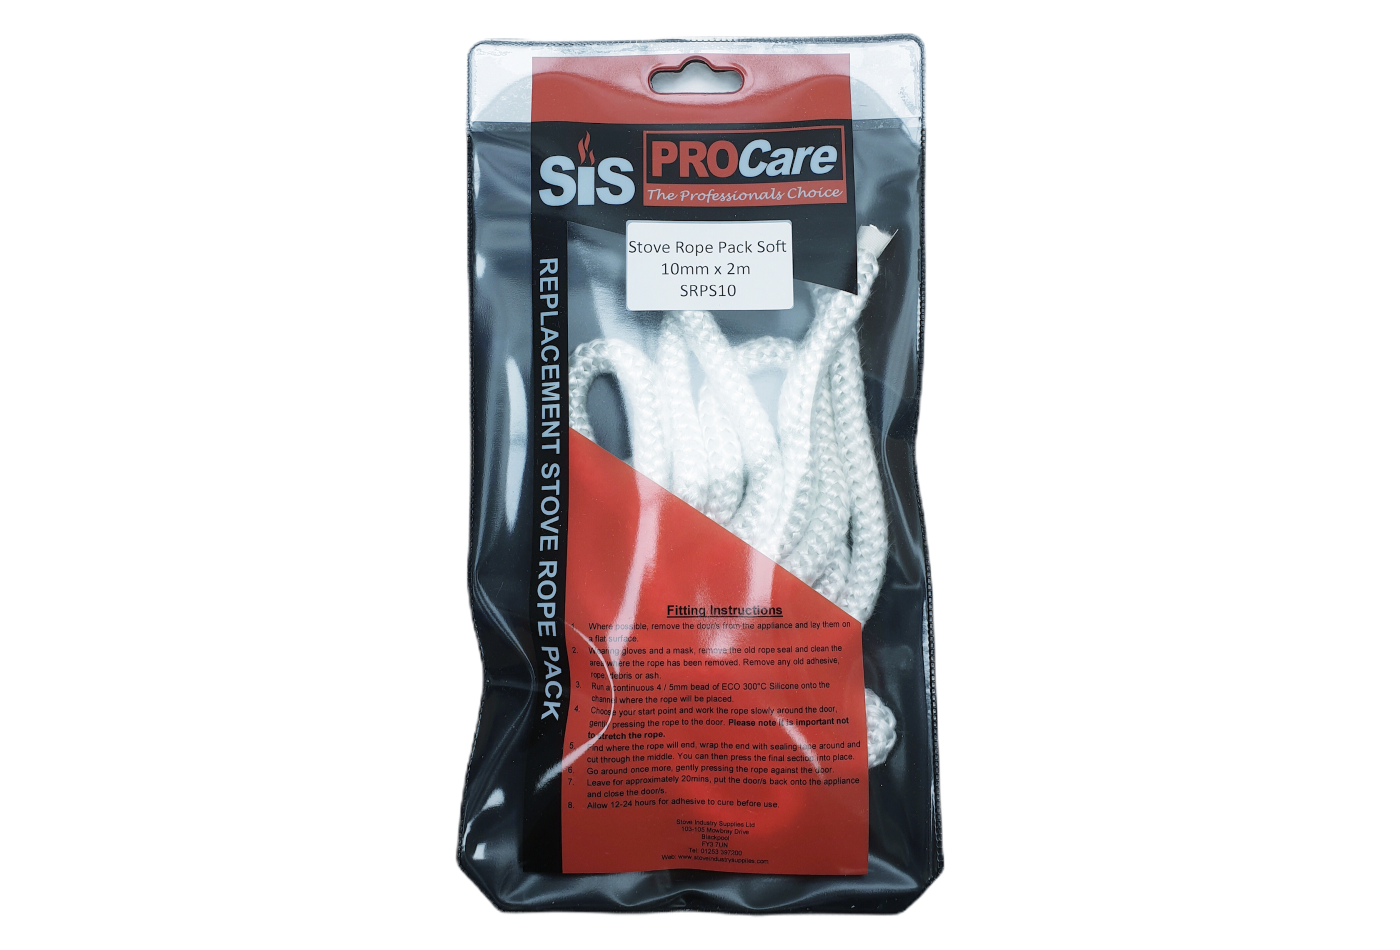 SiS Procare White 10 milimetre x 2 metre Soft Stove Rope Pack - product code SRPS10